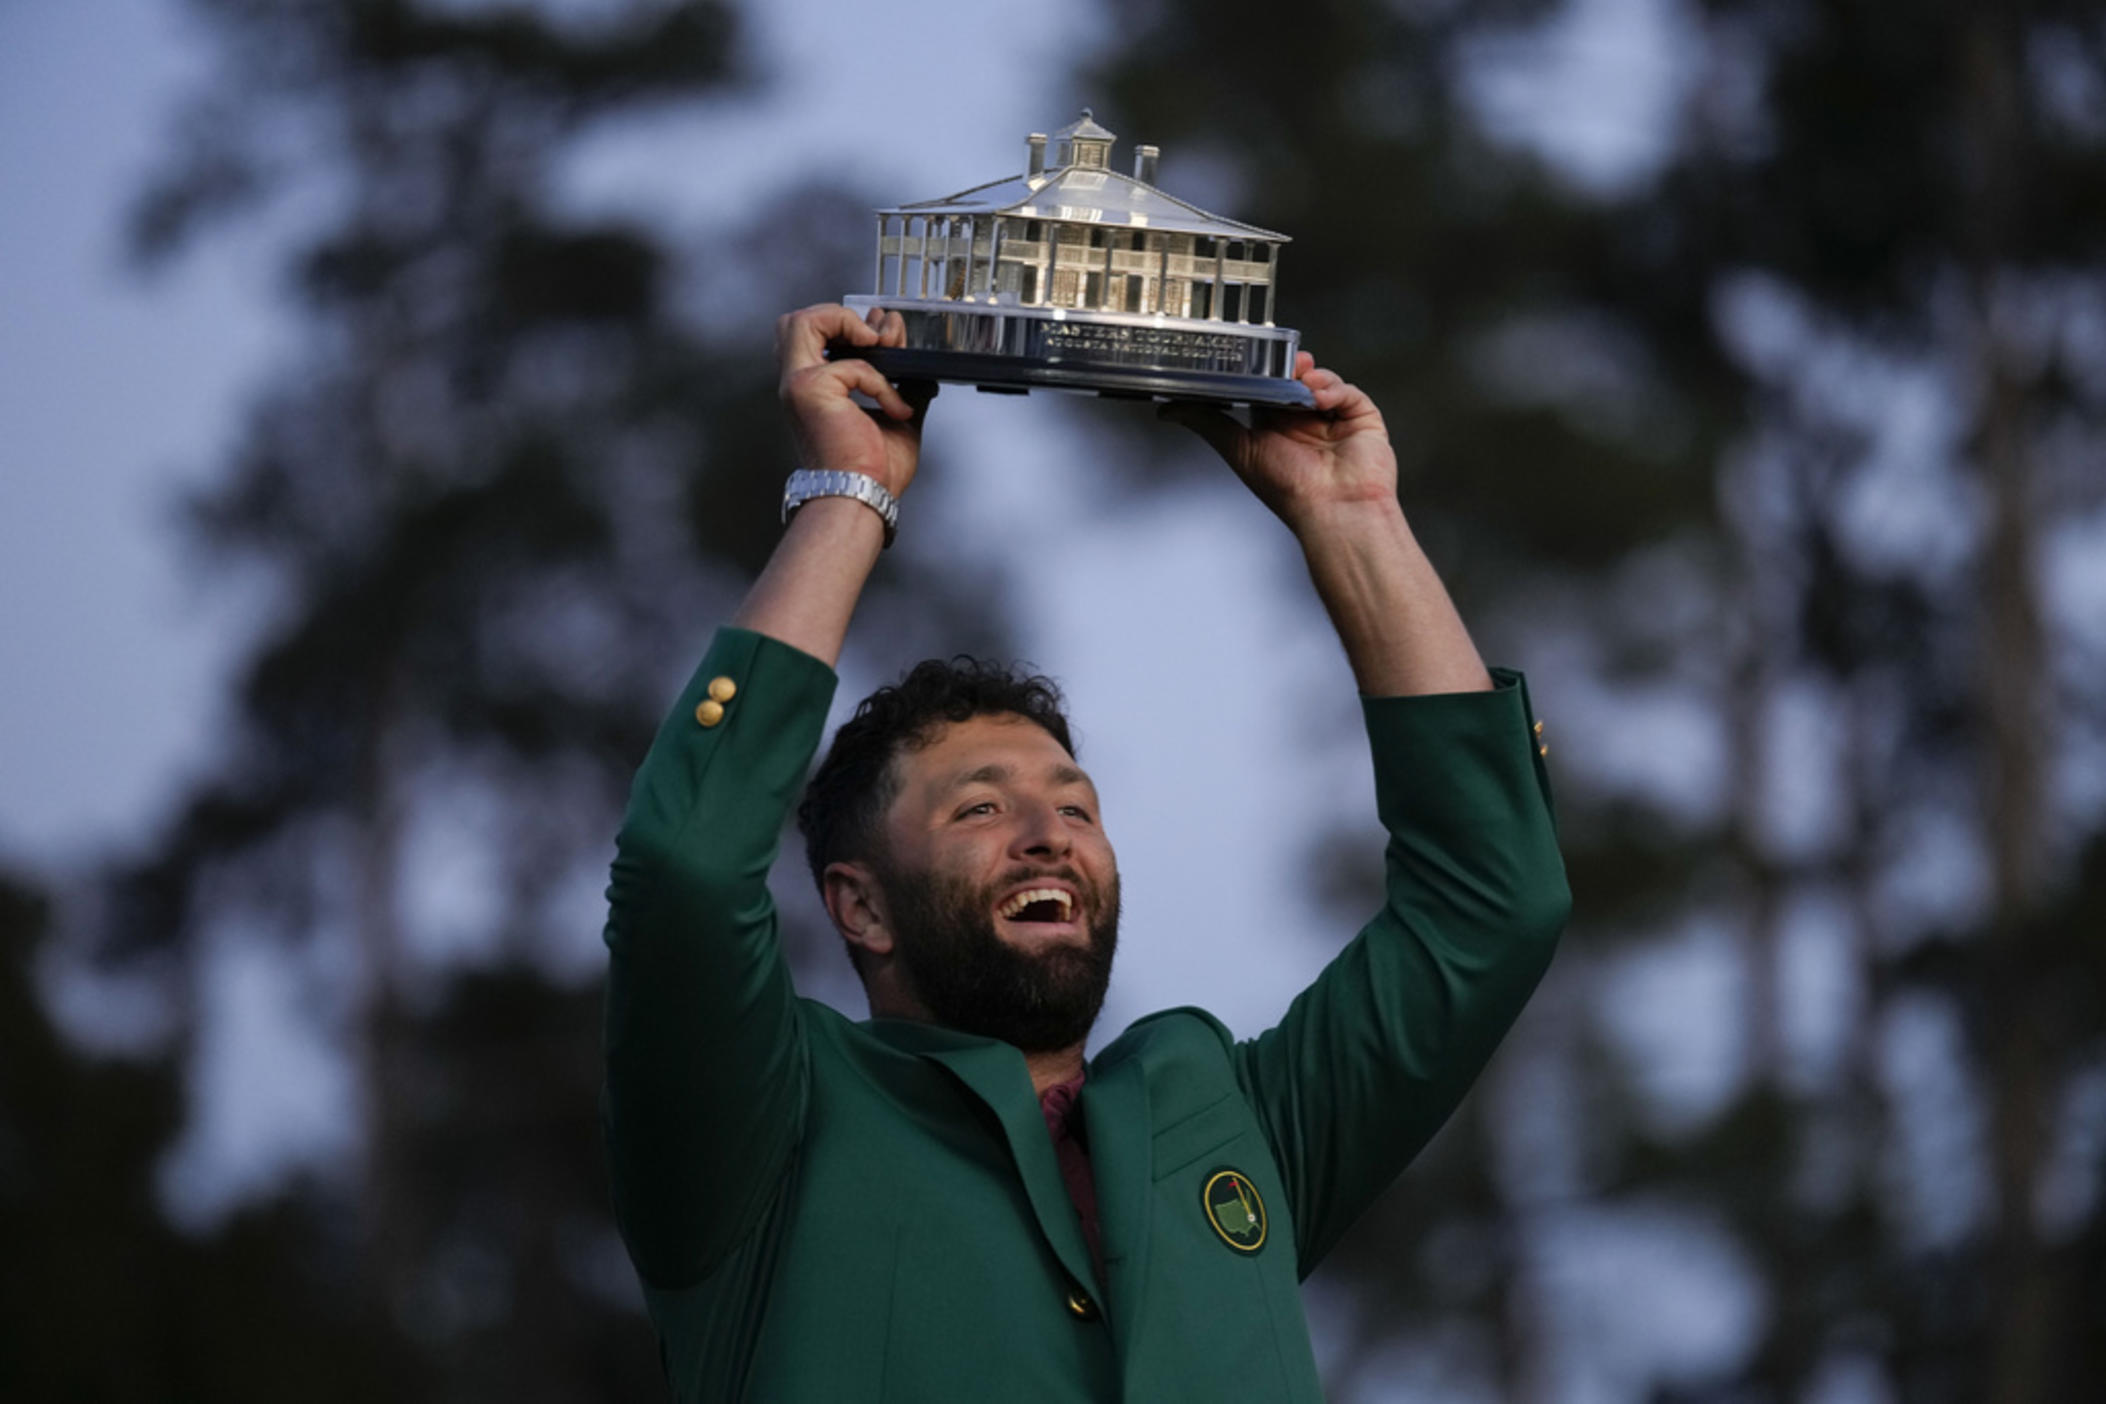 Jon Rahm, of Spain, celebrates holding the Masters trophy winning the Masters golf tournament at Augusta National Golf Club on Sunday, April 9, 2023, in Augusta, Ga.